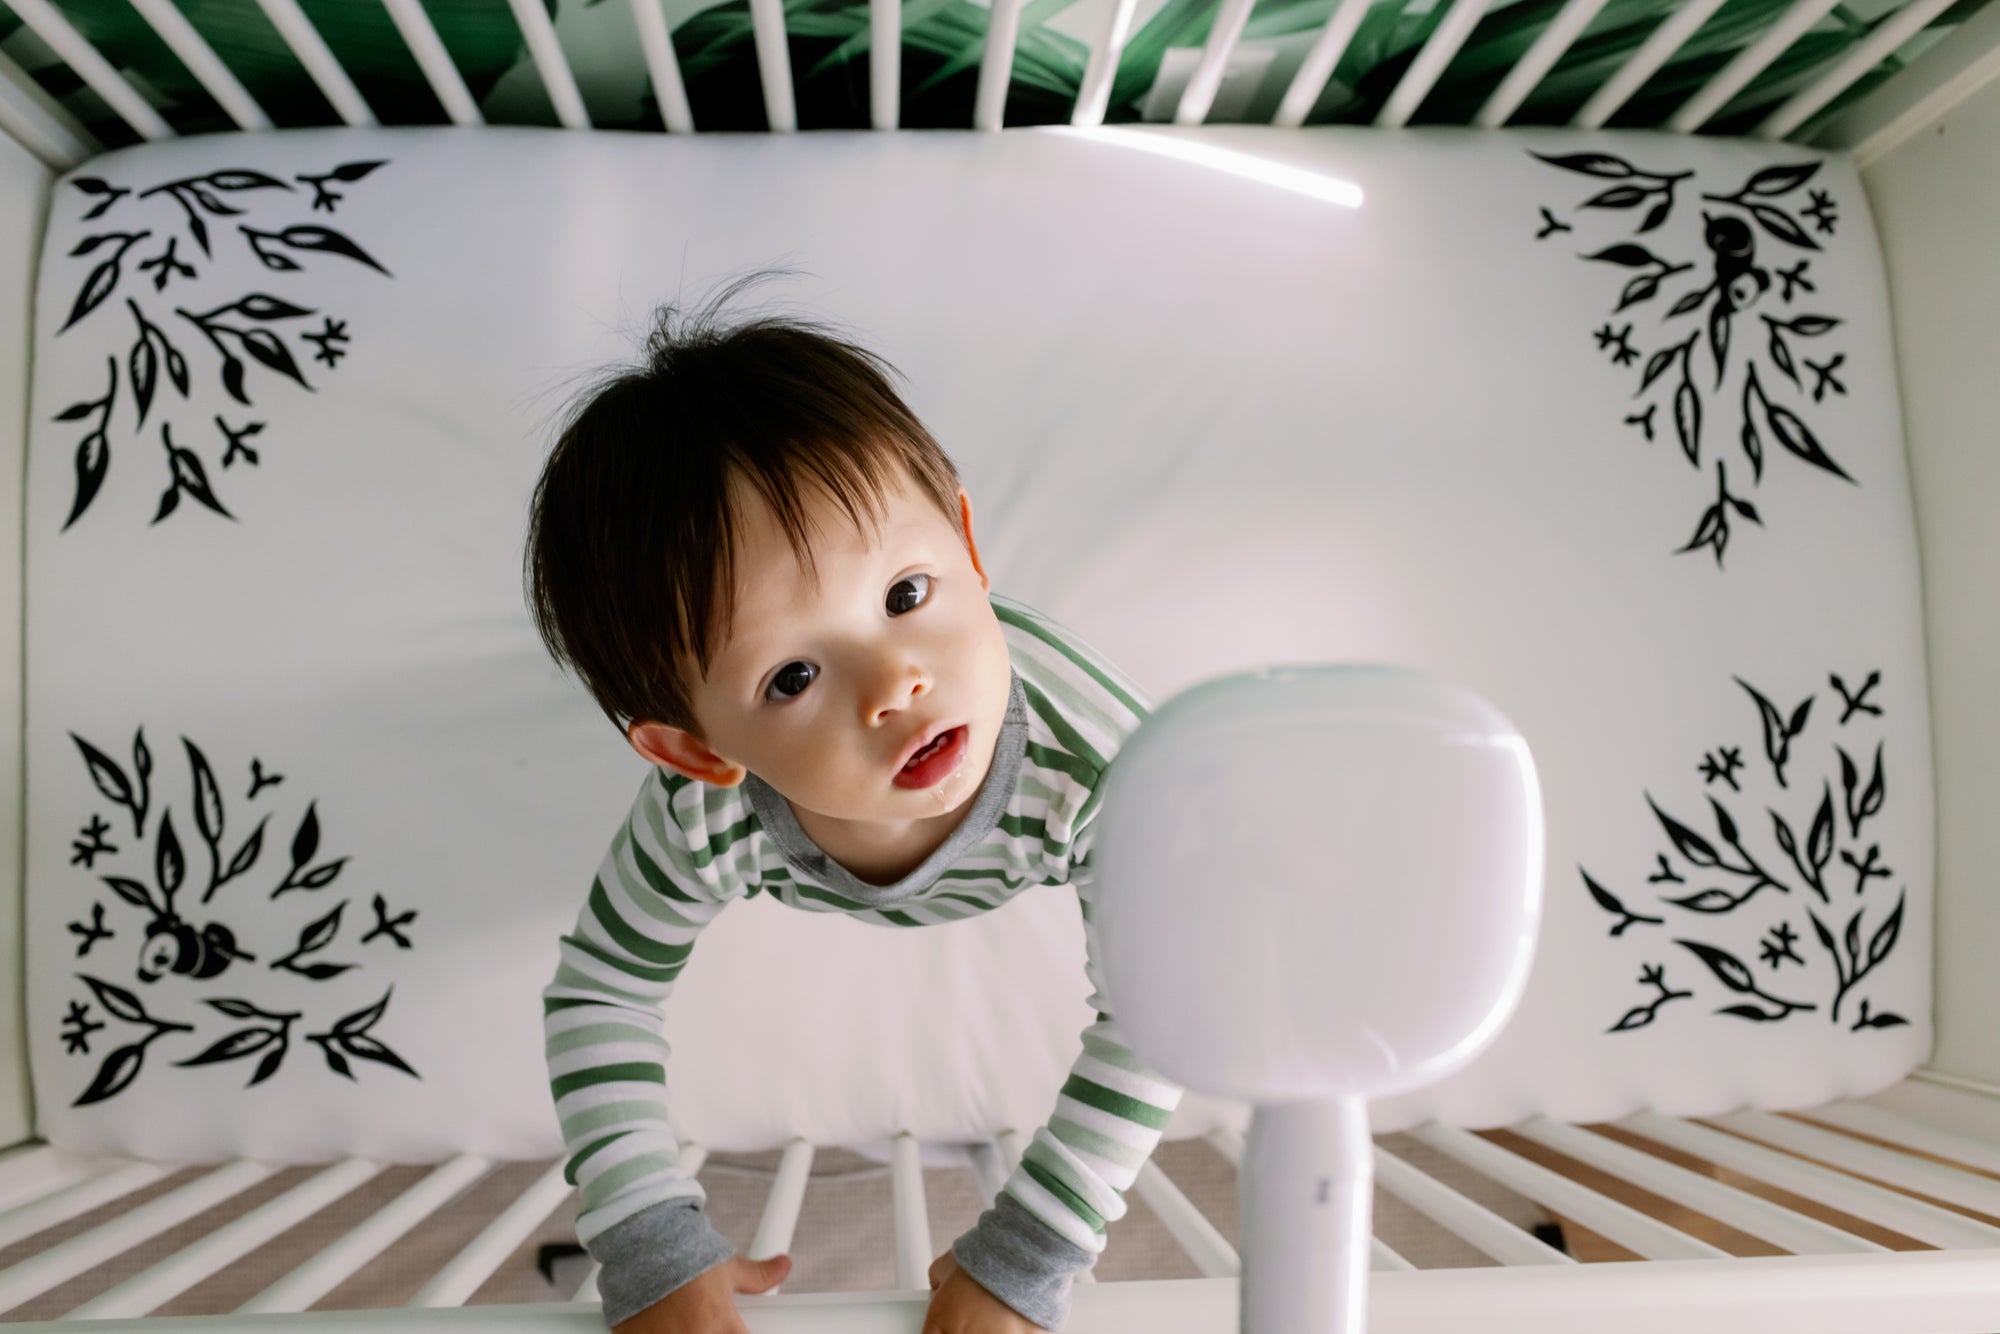 “How do I determine the right bedtime for my baby?”